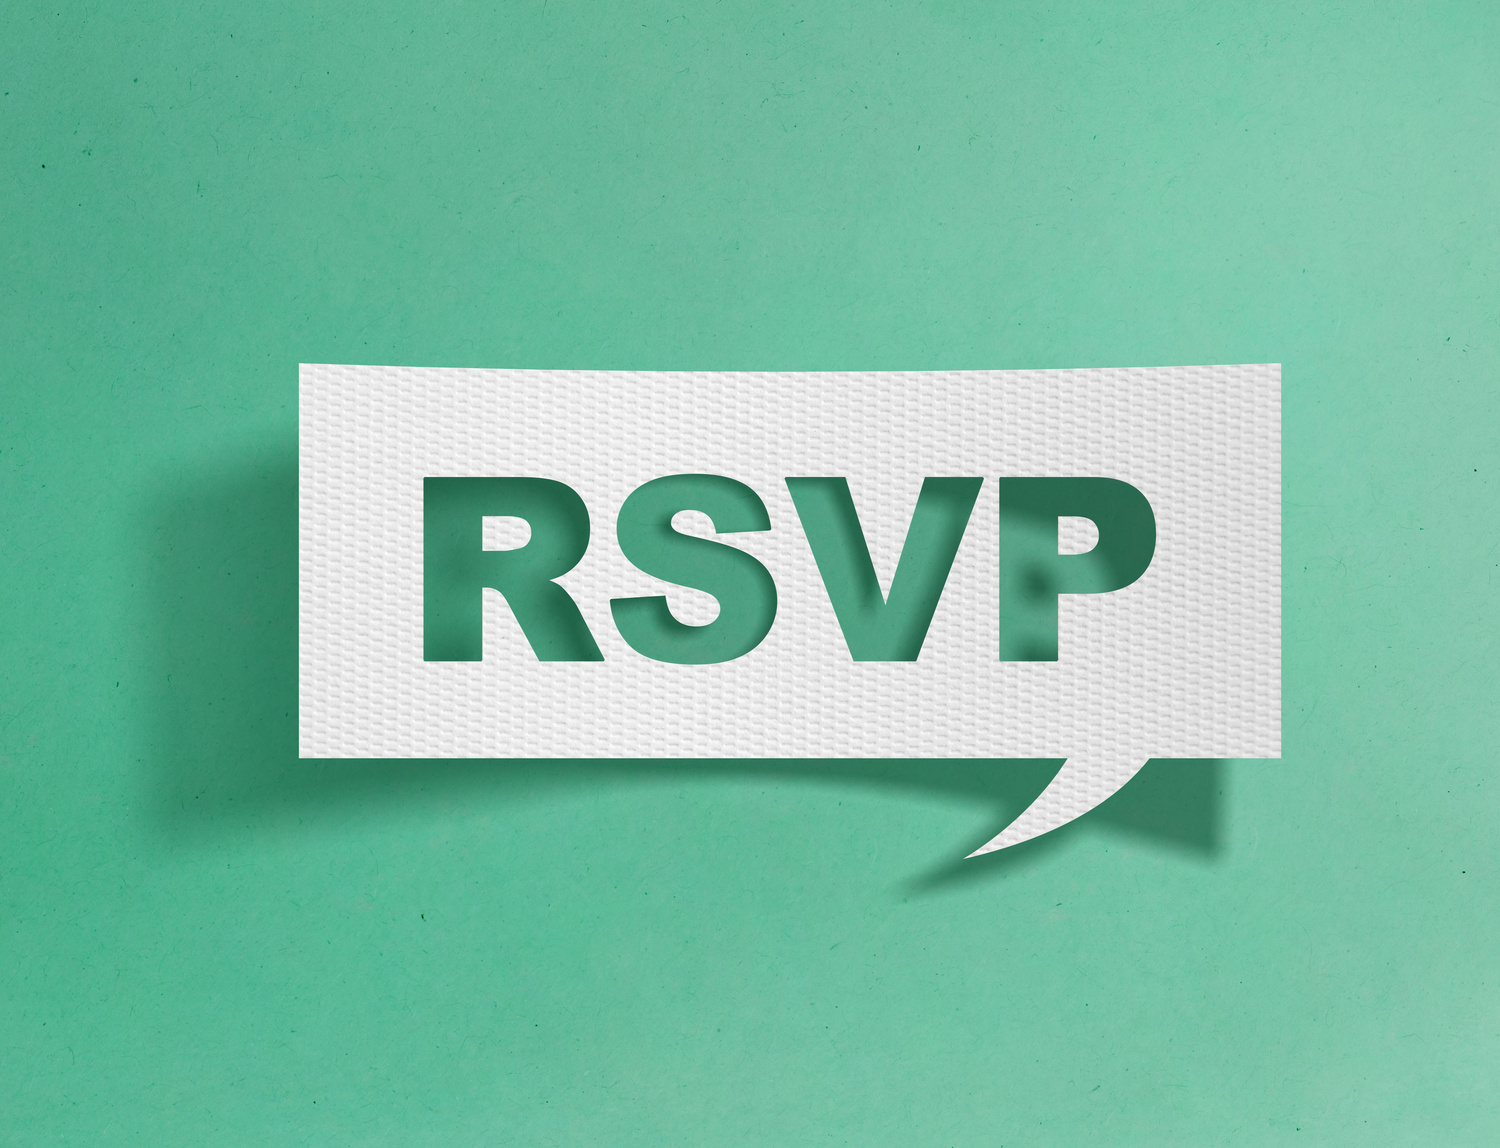 Speech bubble with rsvp message